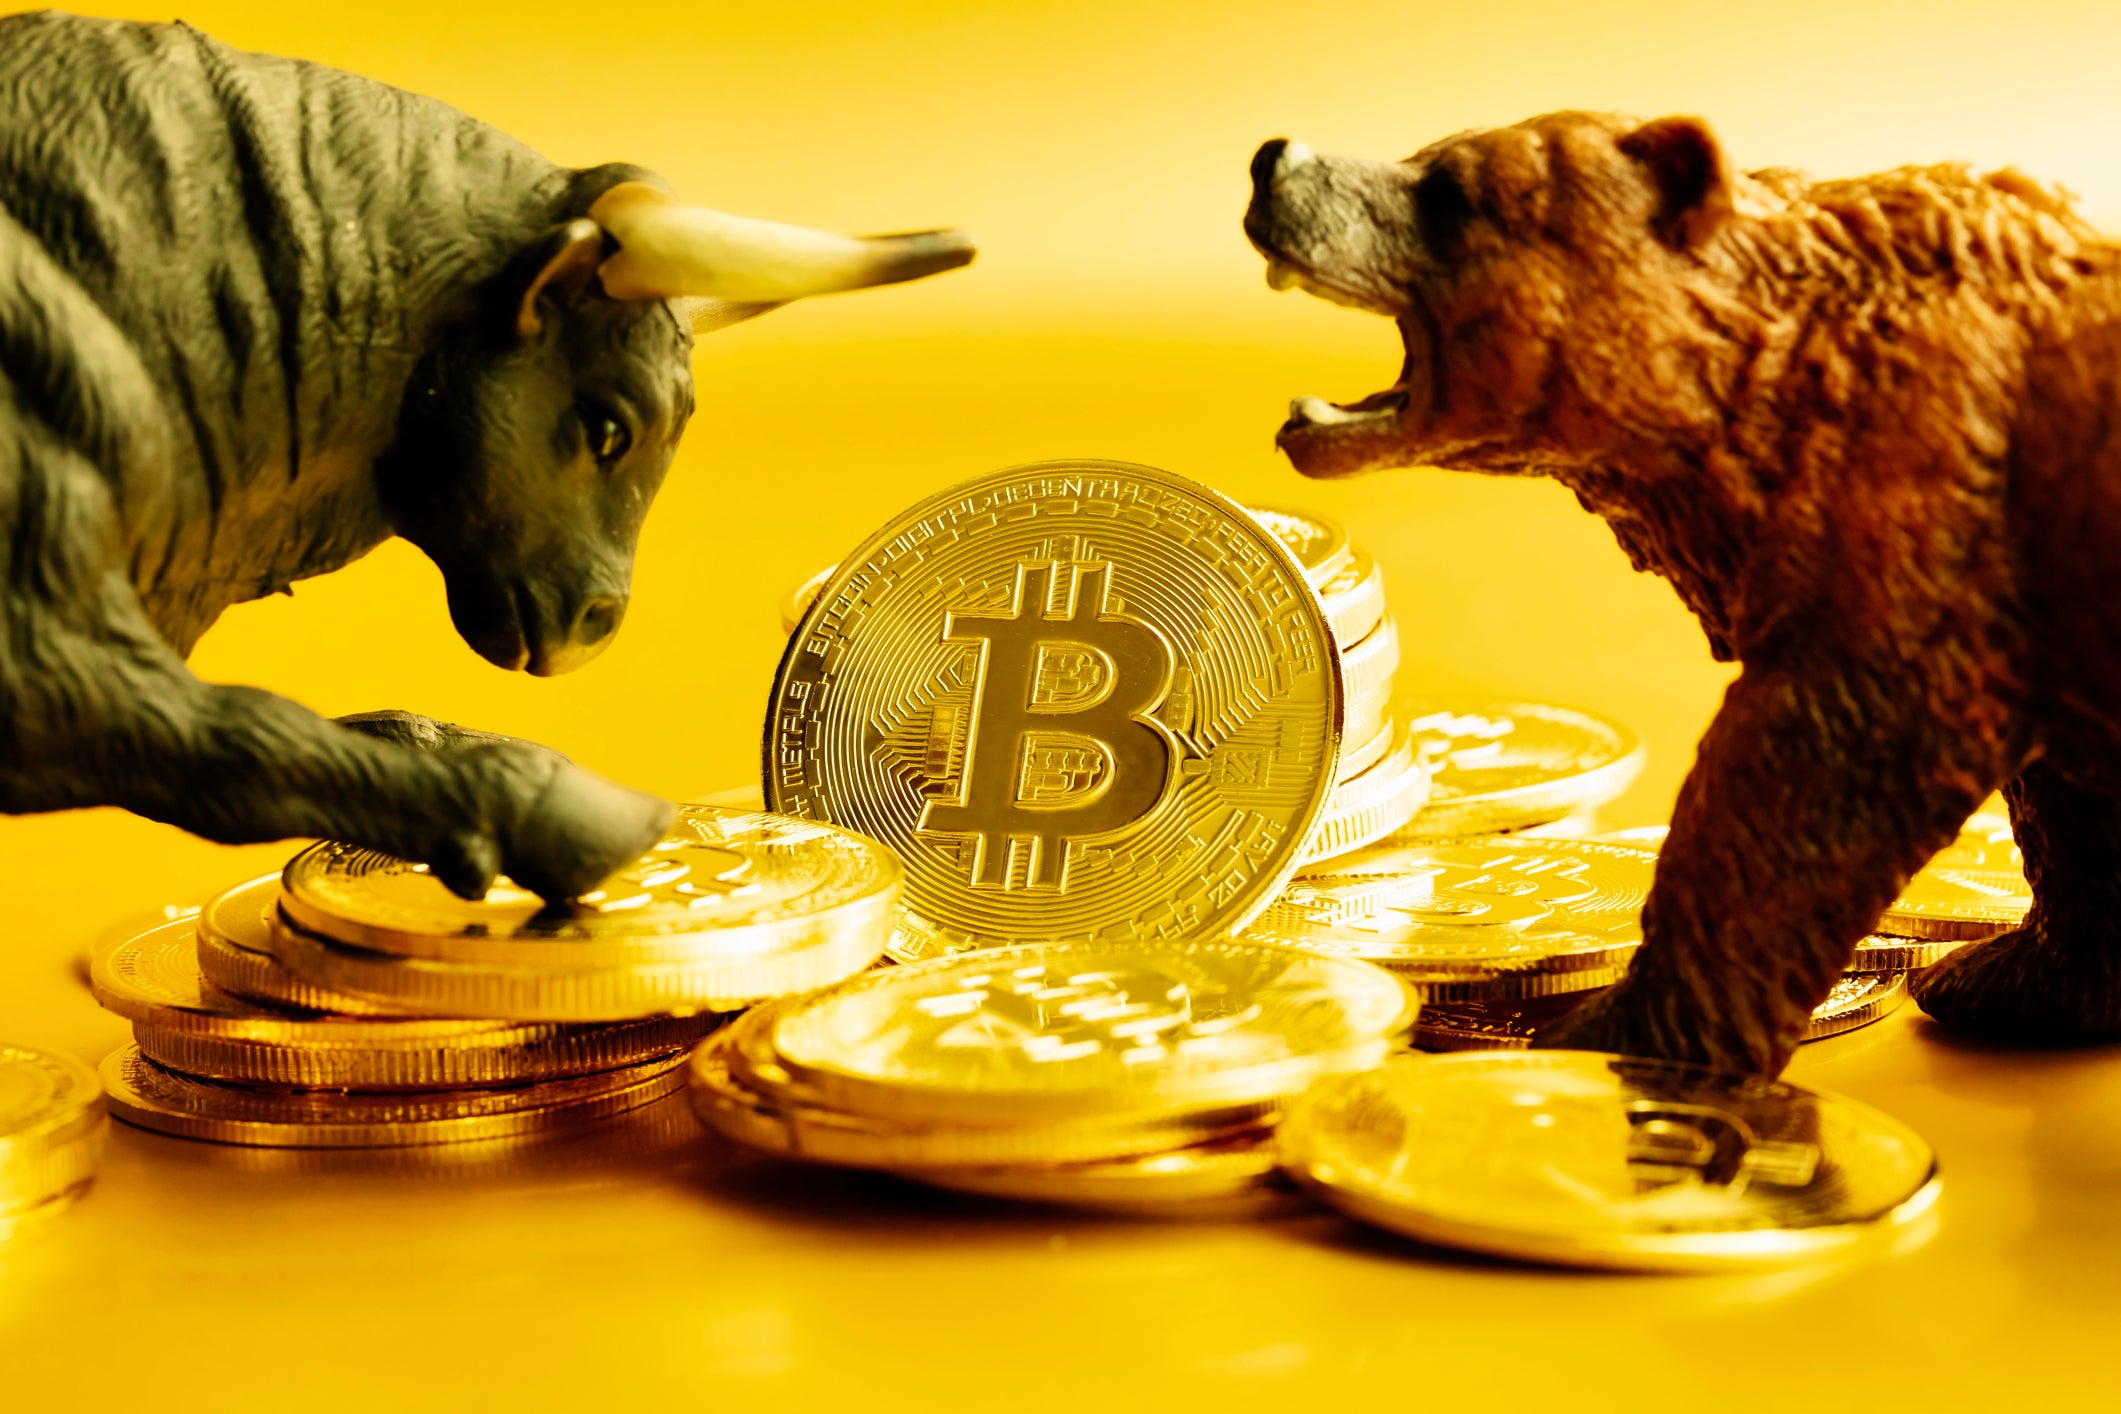 Both Bitcoin and Ethereum bears